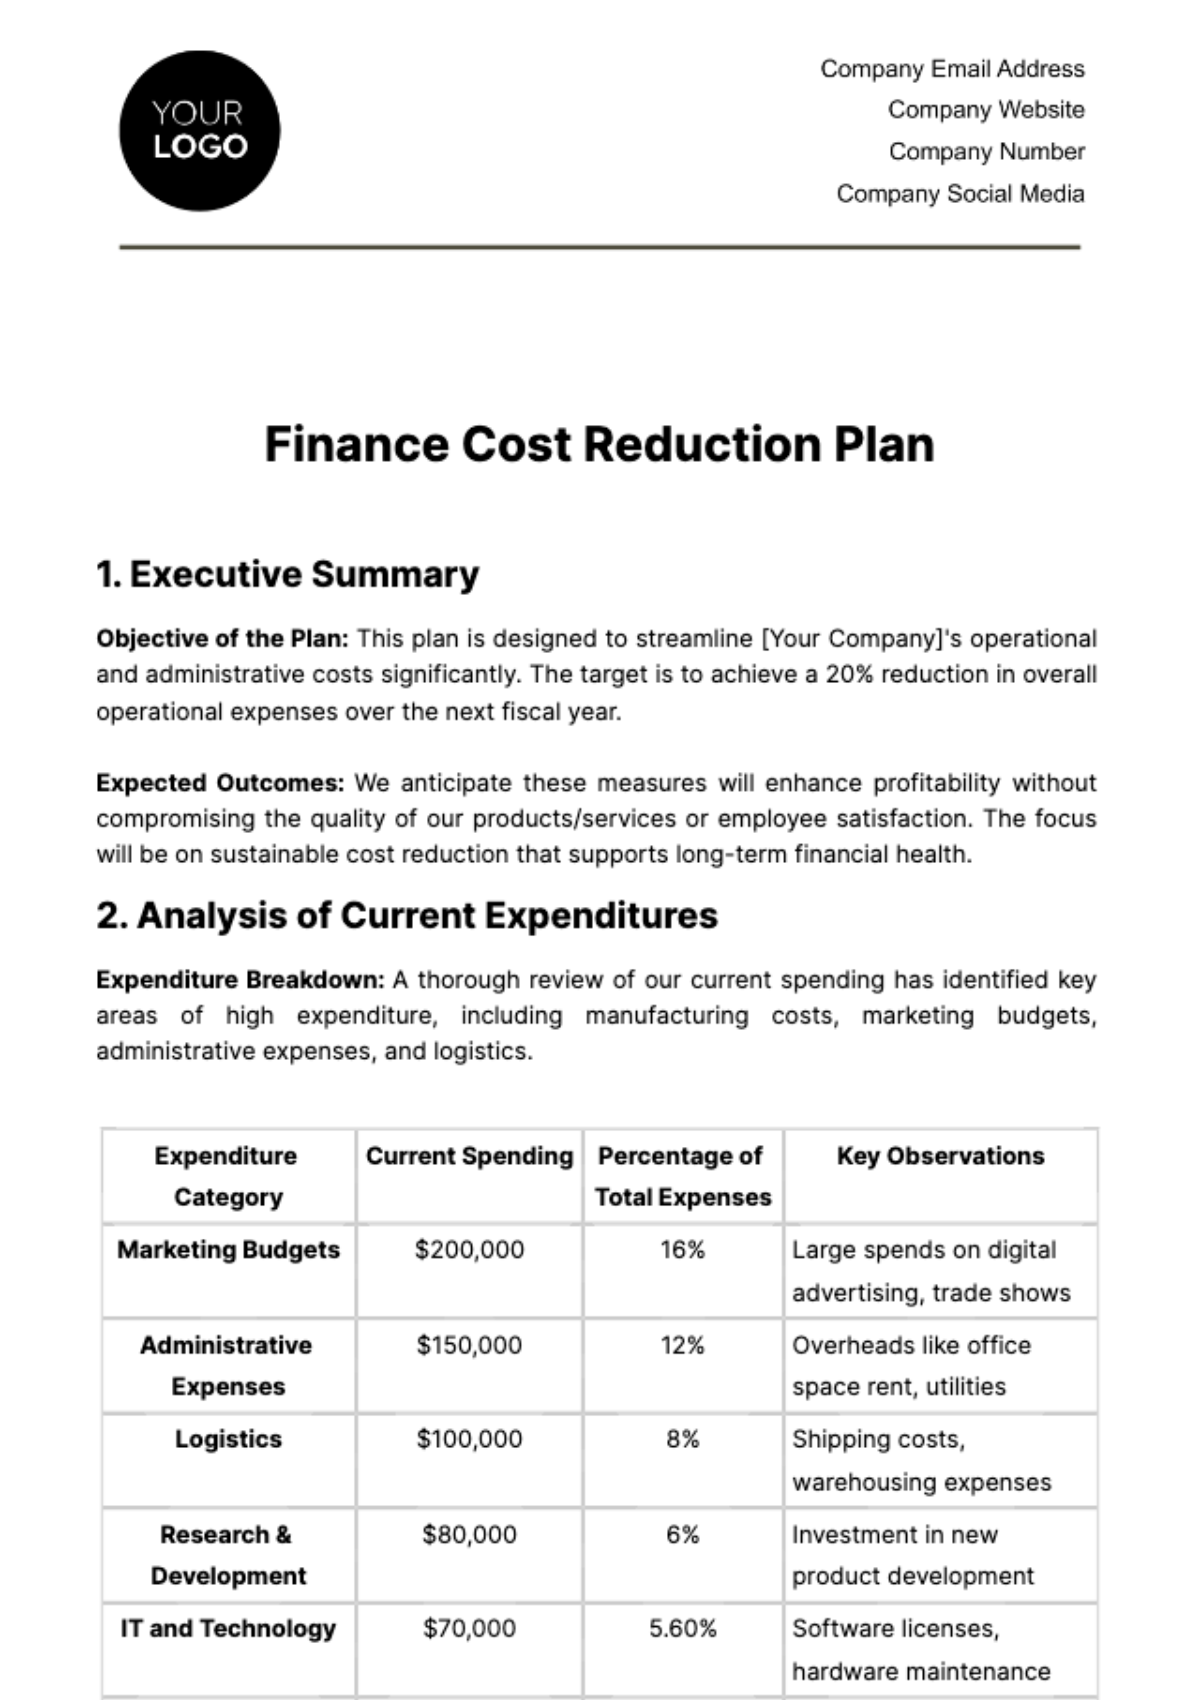 Finance Cost Reduction Plan Template